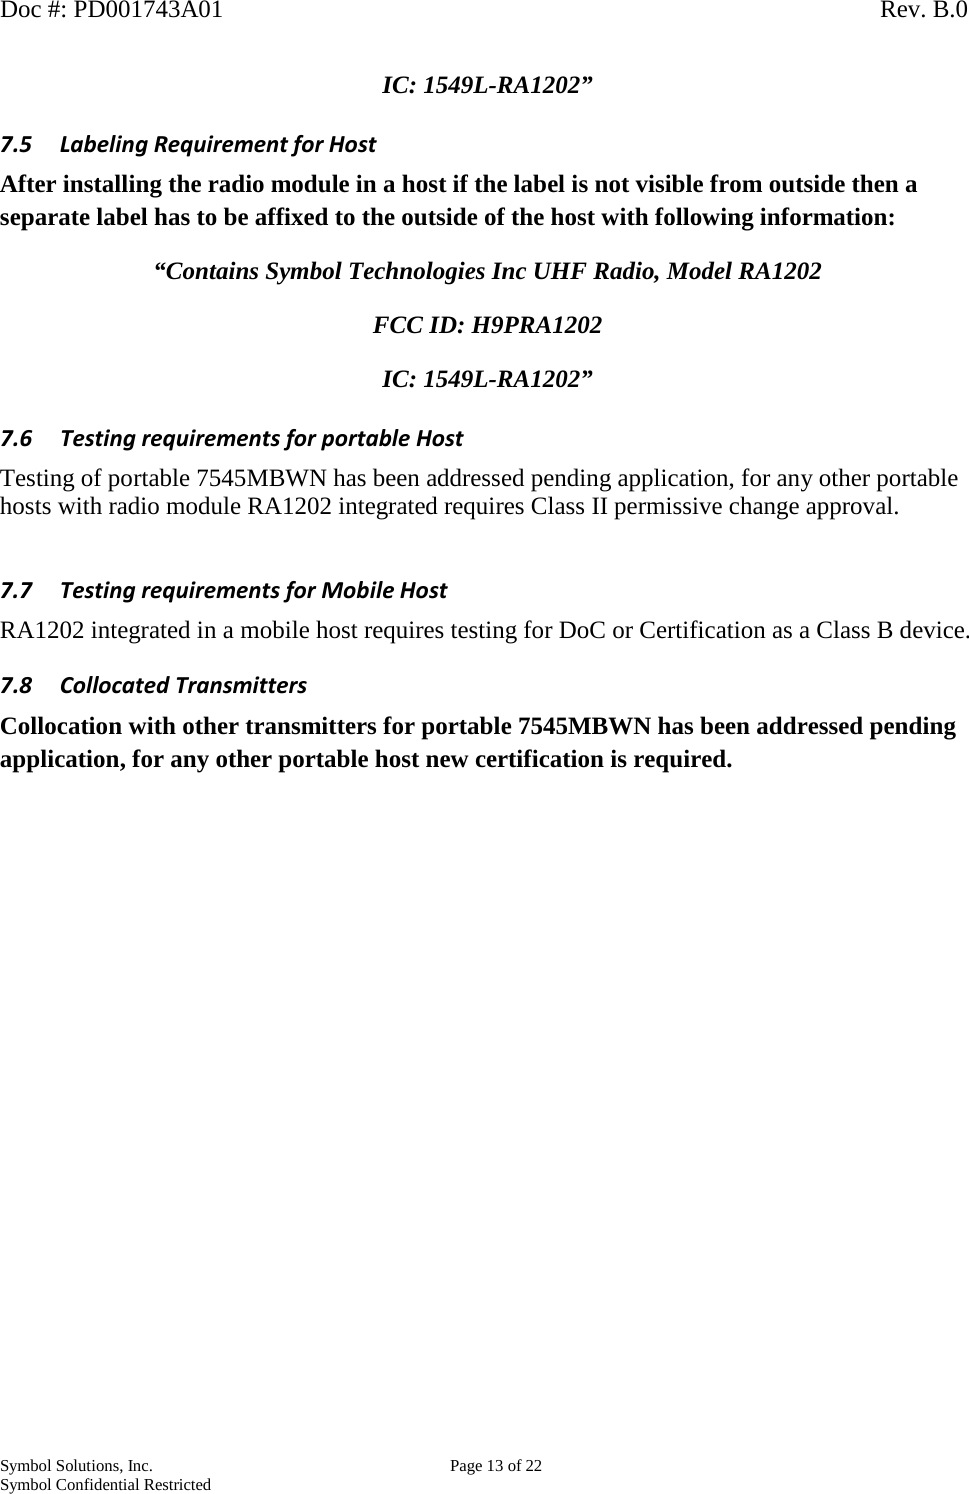 Doc #: PD001743A01                                                                                                         Rev. B.0 Symbol Solutions, Inc.    Page 13 of 22 Symbol Confidential Restricted   IC: 1549L-RA1202” 7.5 Labeling Requirement for Host After installing the radio module in a host if the label is not visible from outside then a separate label has to be affixed to the outside of the host with following information: “Contains Symbol Technologies Inc UHF Radio, Model RA1202 FCC ID: H9PRA1202 IC: 1549L-RA1202” 7.6 Testing requirements for portable Host Testing of portable 7545MBWN has been addressed pending application, for any other portable hosts with radio module RA1202 integrated requires Class II permissive change approval.  7.7 Testing requirements for Mobile Host RA1202 integrated in a mobile host requires testing for DoC or Certification as a Class B device.   7.8 Collocated Transmitters Collocation with other transmitters for portable 7545MBWN has been addressed pending application, for any other portable host new certification is required.    